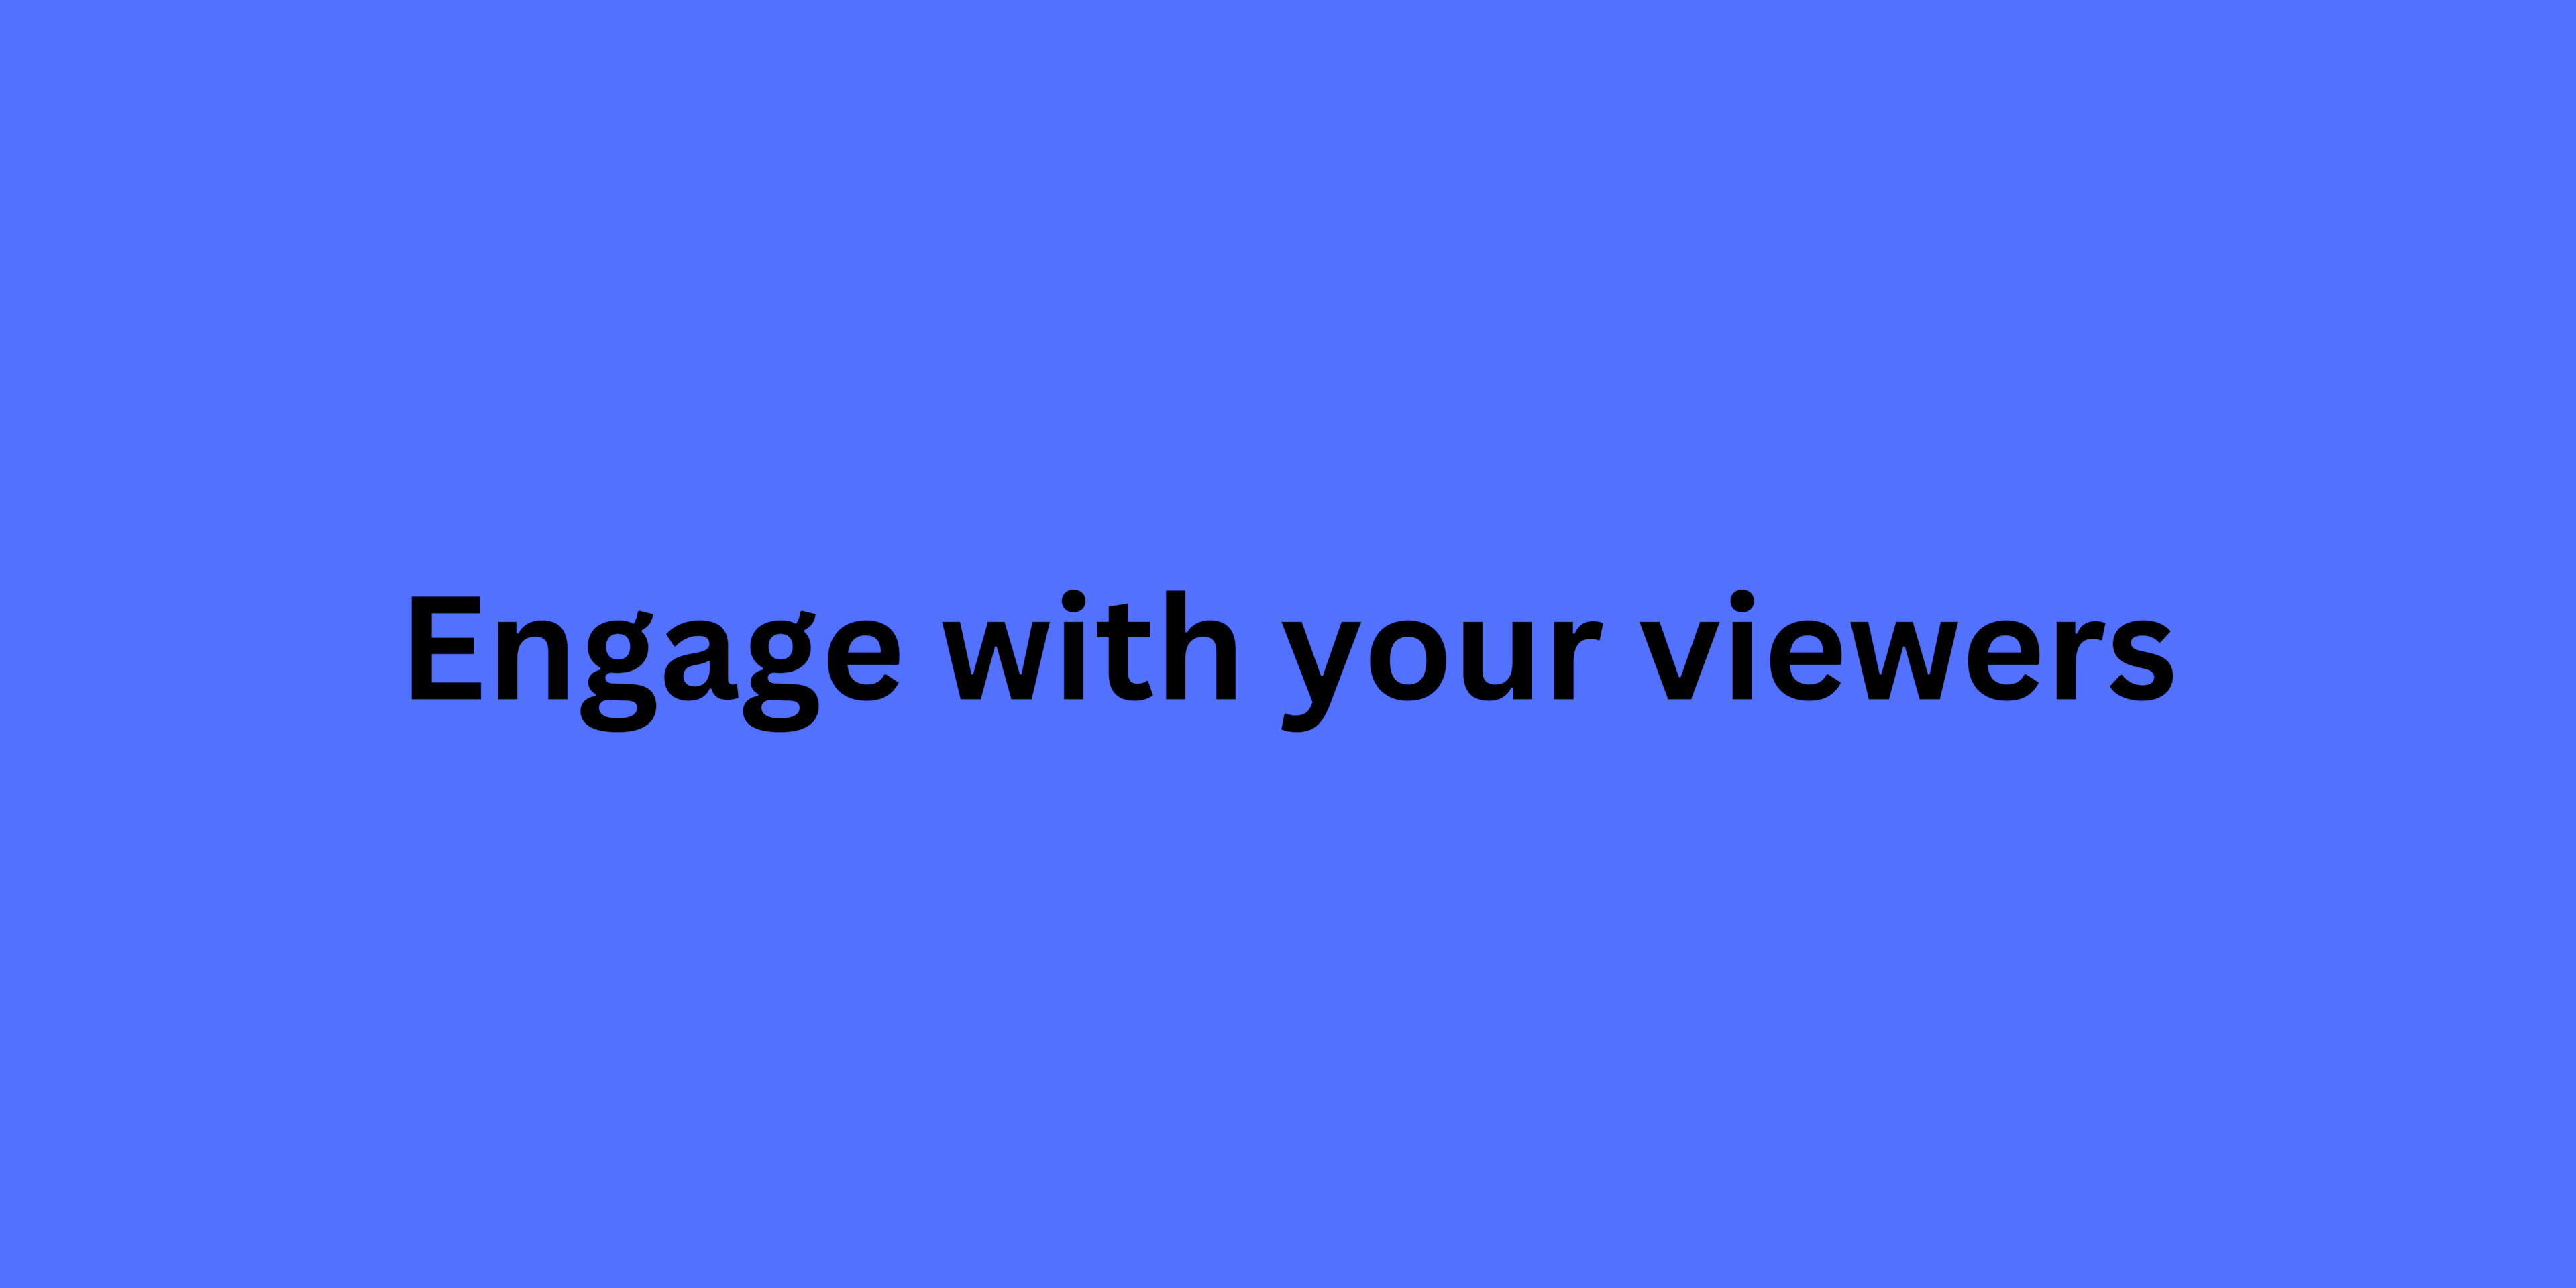 Engage with your viewers